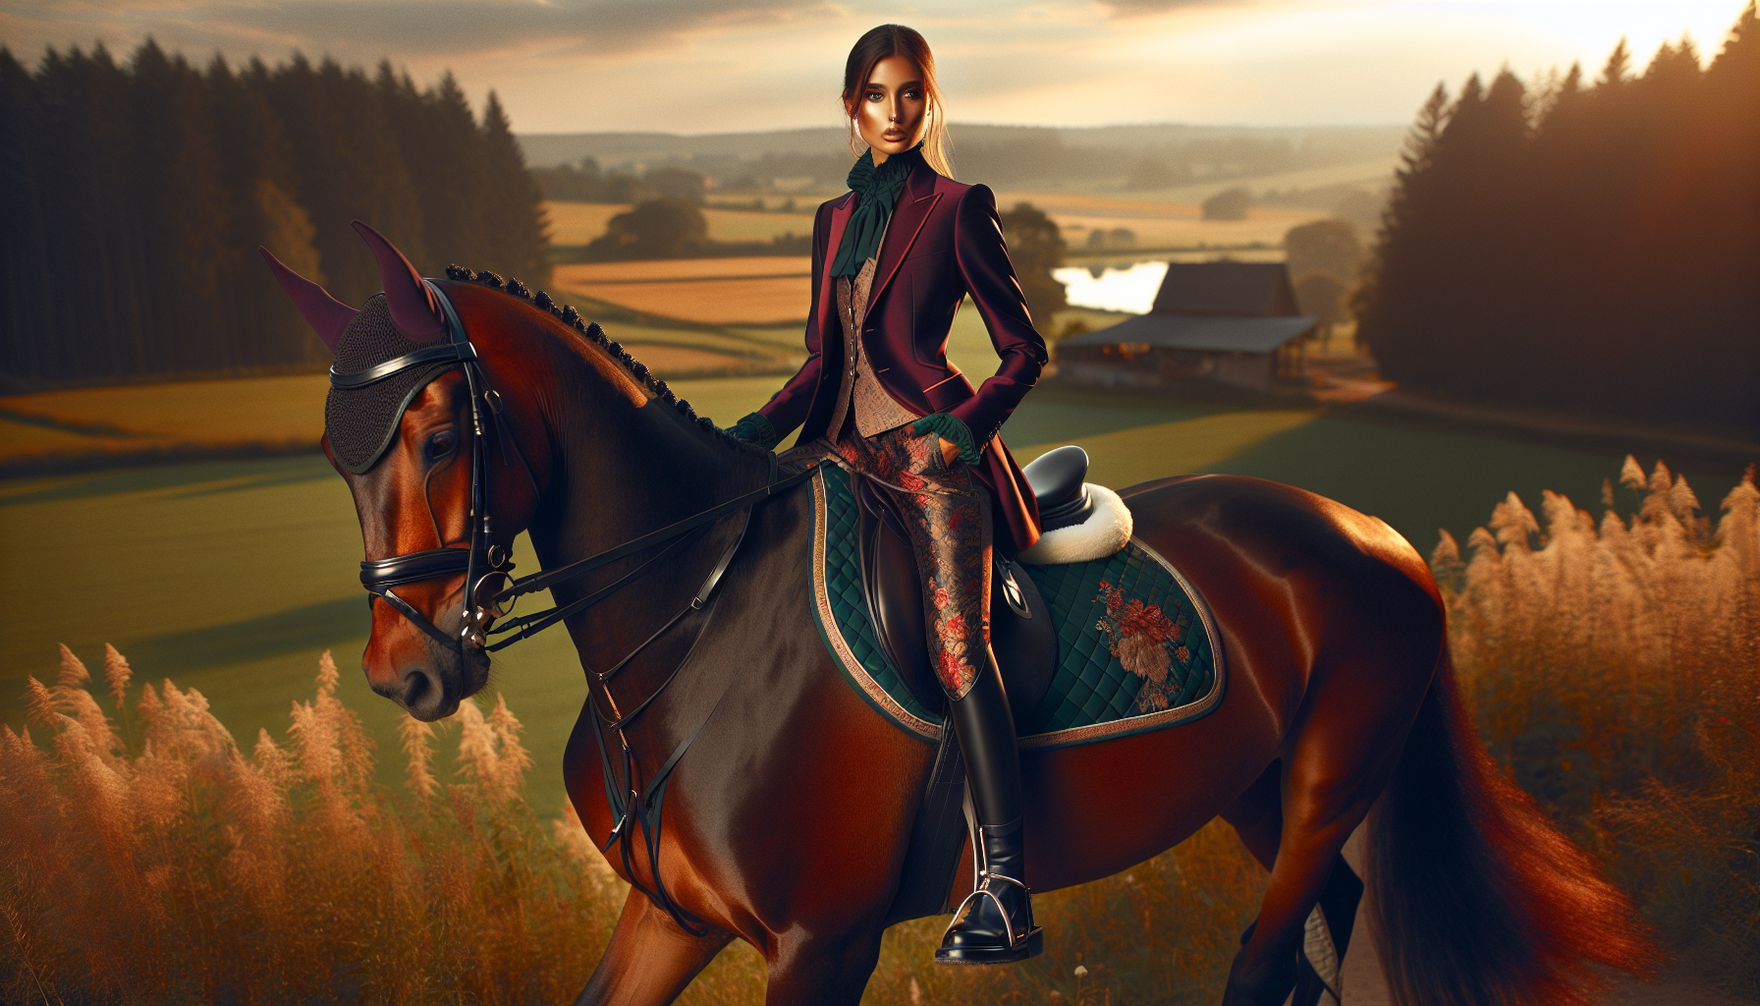 An engaging image showcasing bold equestrian fashion trends. The scene includes a stylish South Asian female rider, impeccably dressed in contemporary riding gear including a burgundy blazer, silk bro